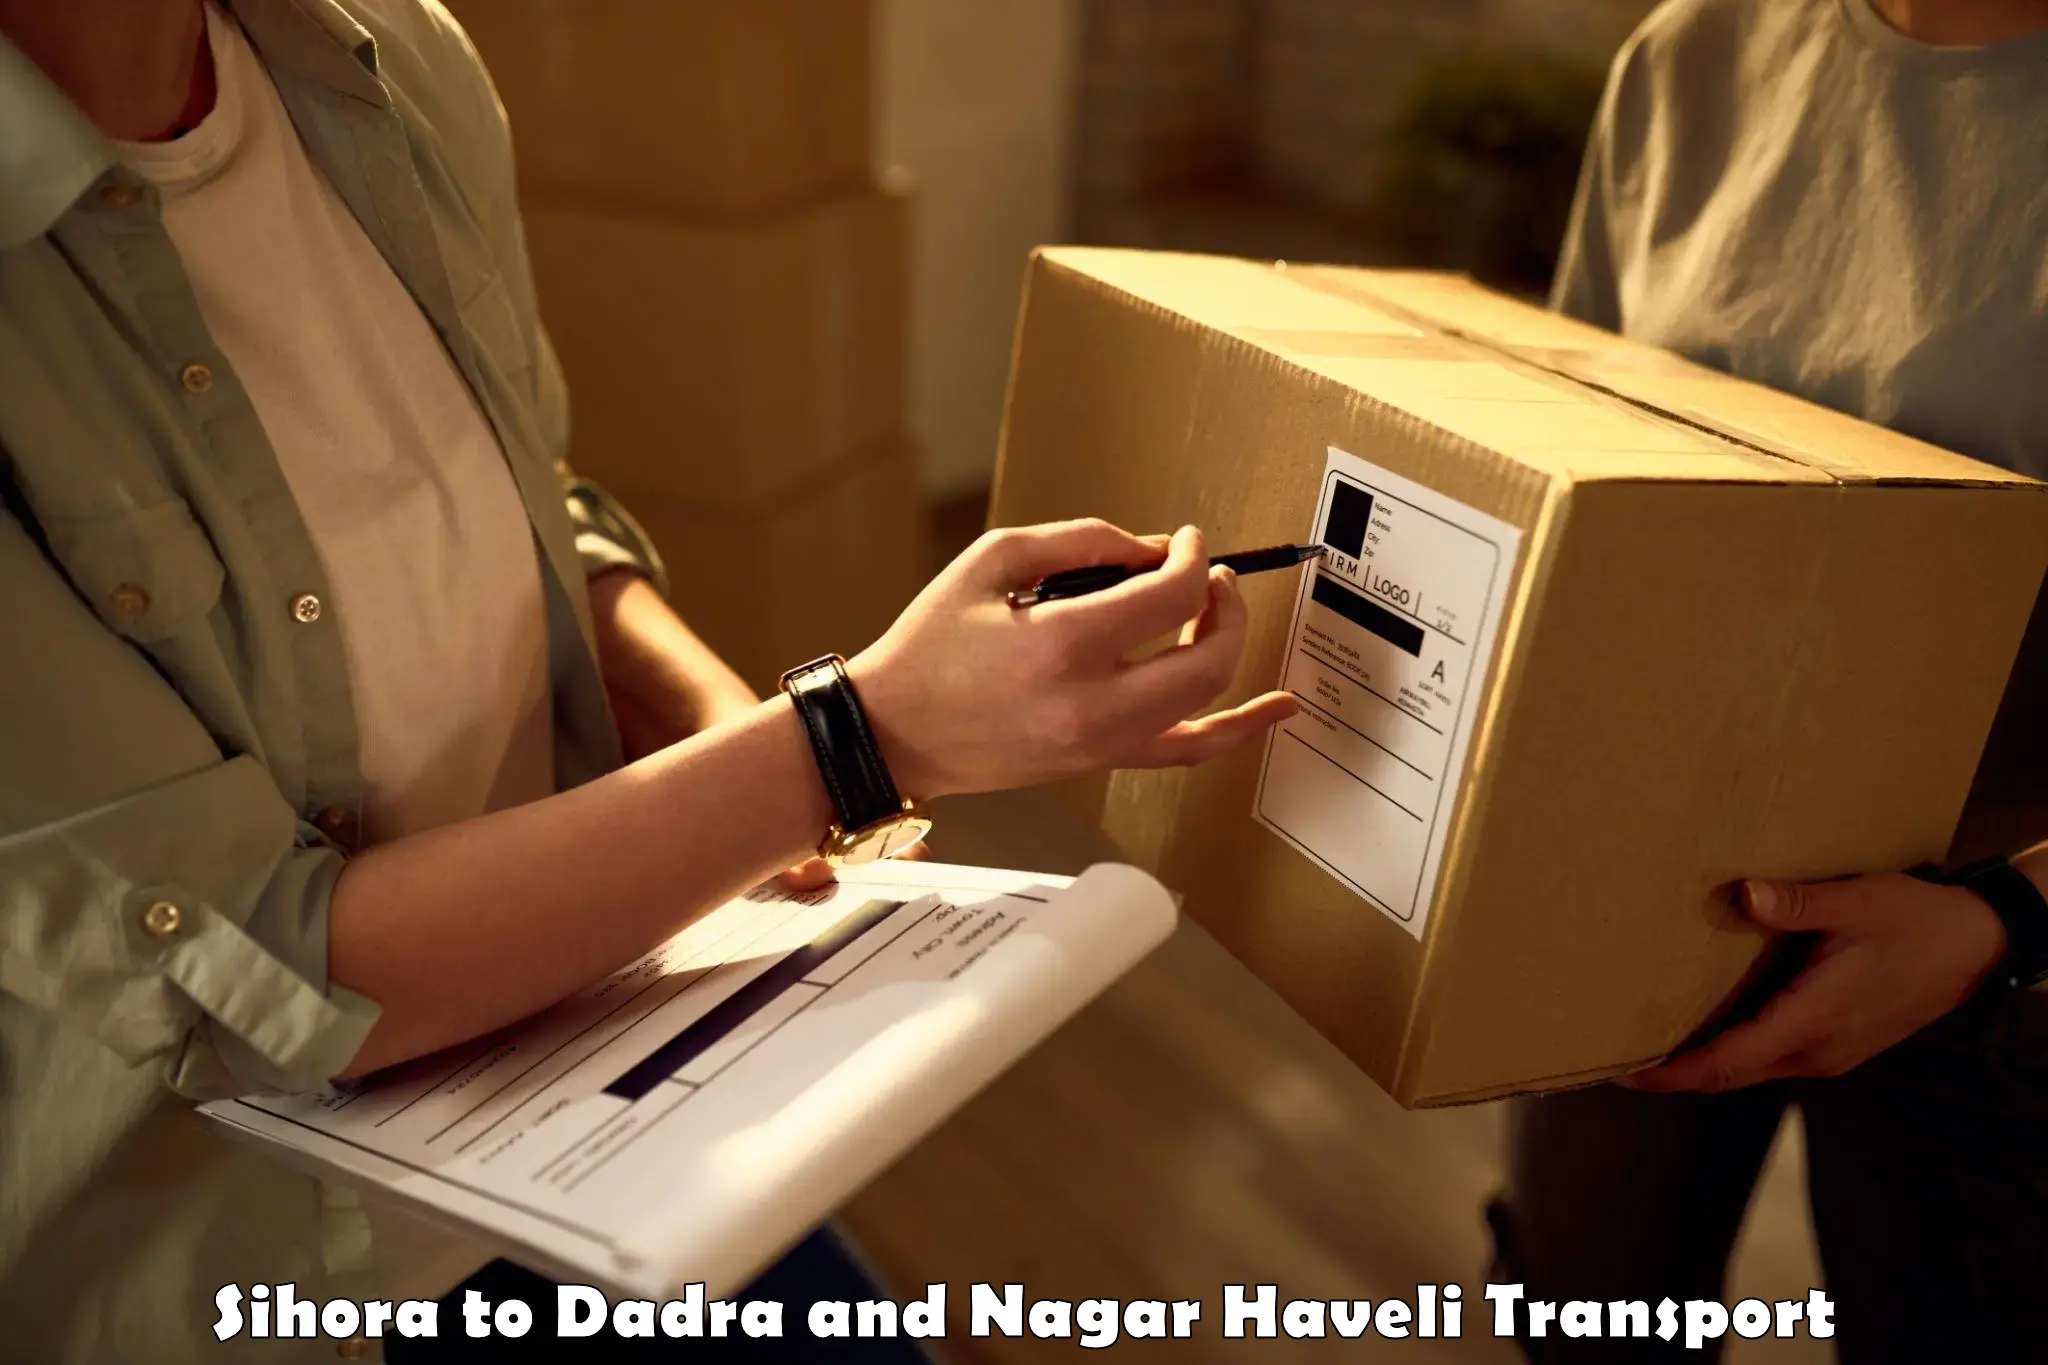 Container transport service Sihora to Dadra and Nagar Haveli